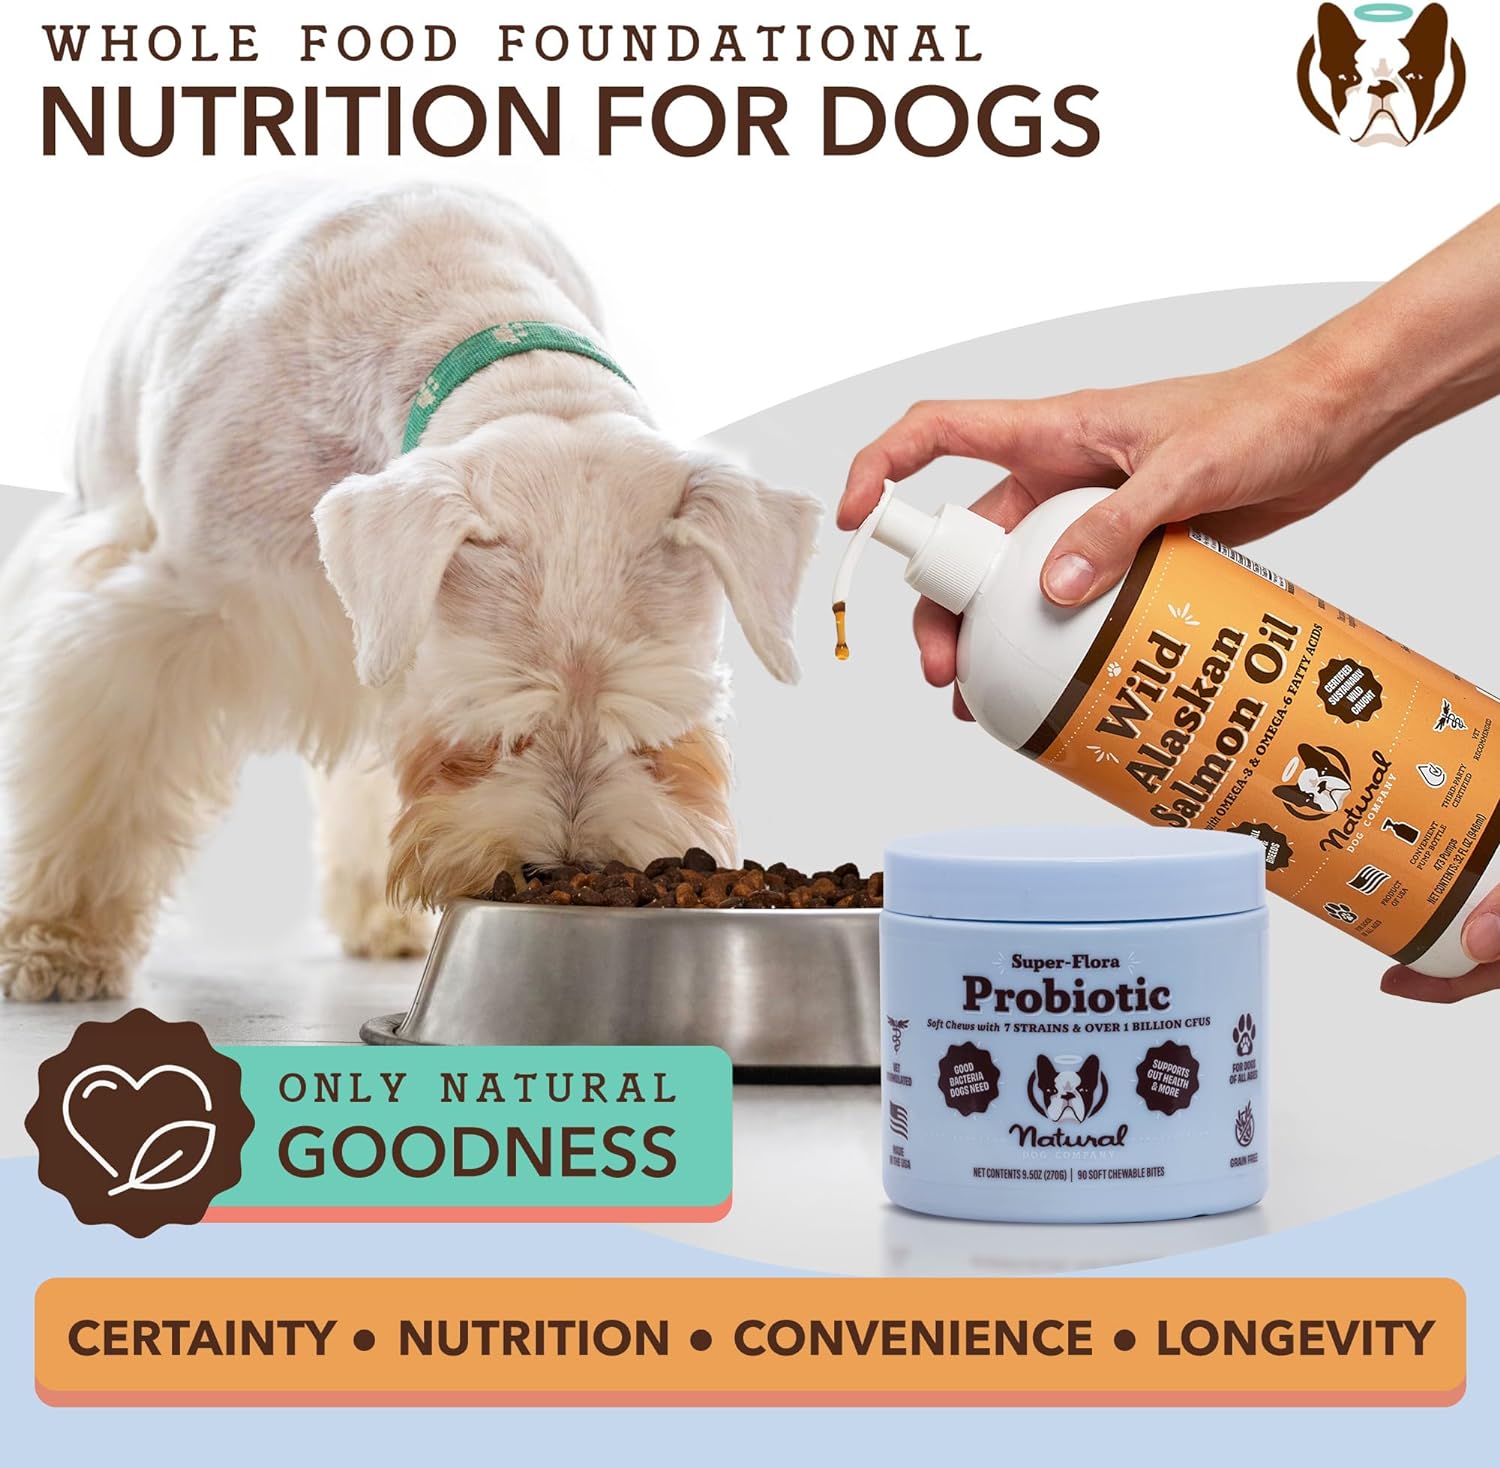 Natural Dog Company Probiotic Chews for Dogs (90 Bites), Chicken Flavor, Helps with Digestion & Gut Health Supports Immune System, Probiotics Supplement for Dogs of All Ages, Sizes & Breeds. : Pet Supplies